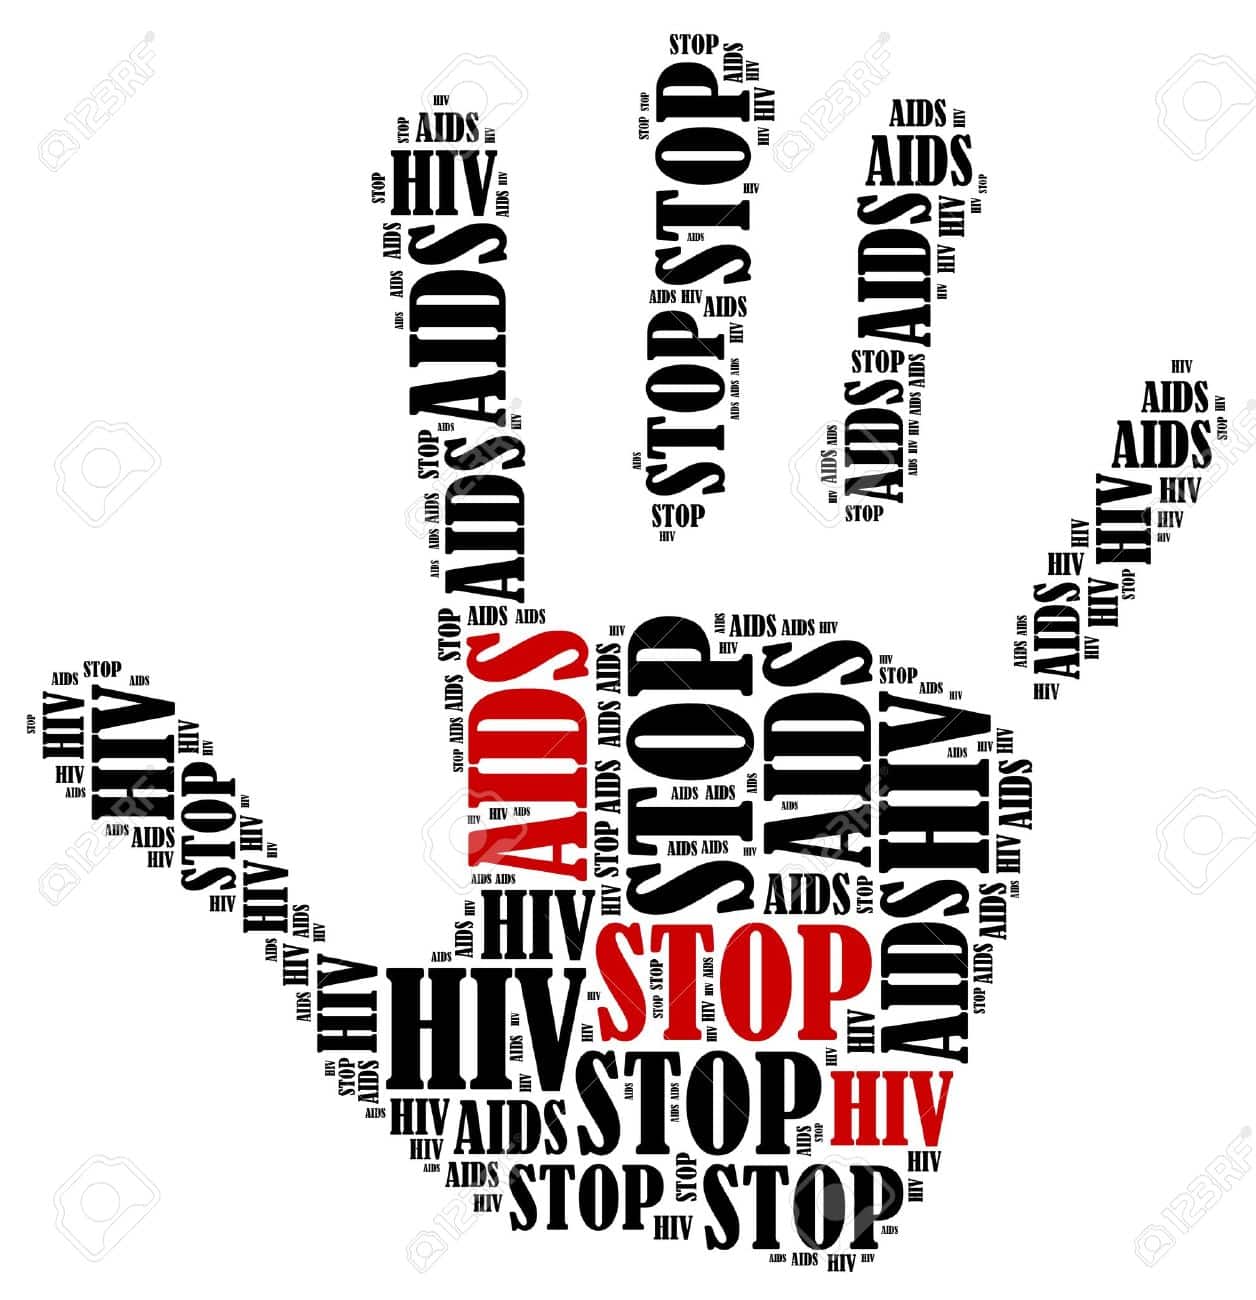 Risk of HIV and AIDS high among teens